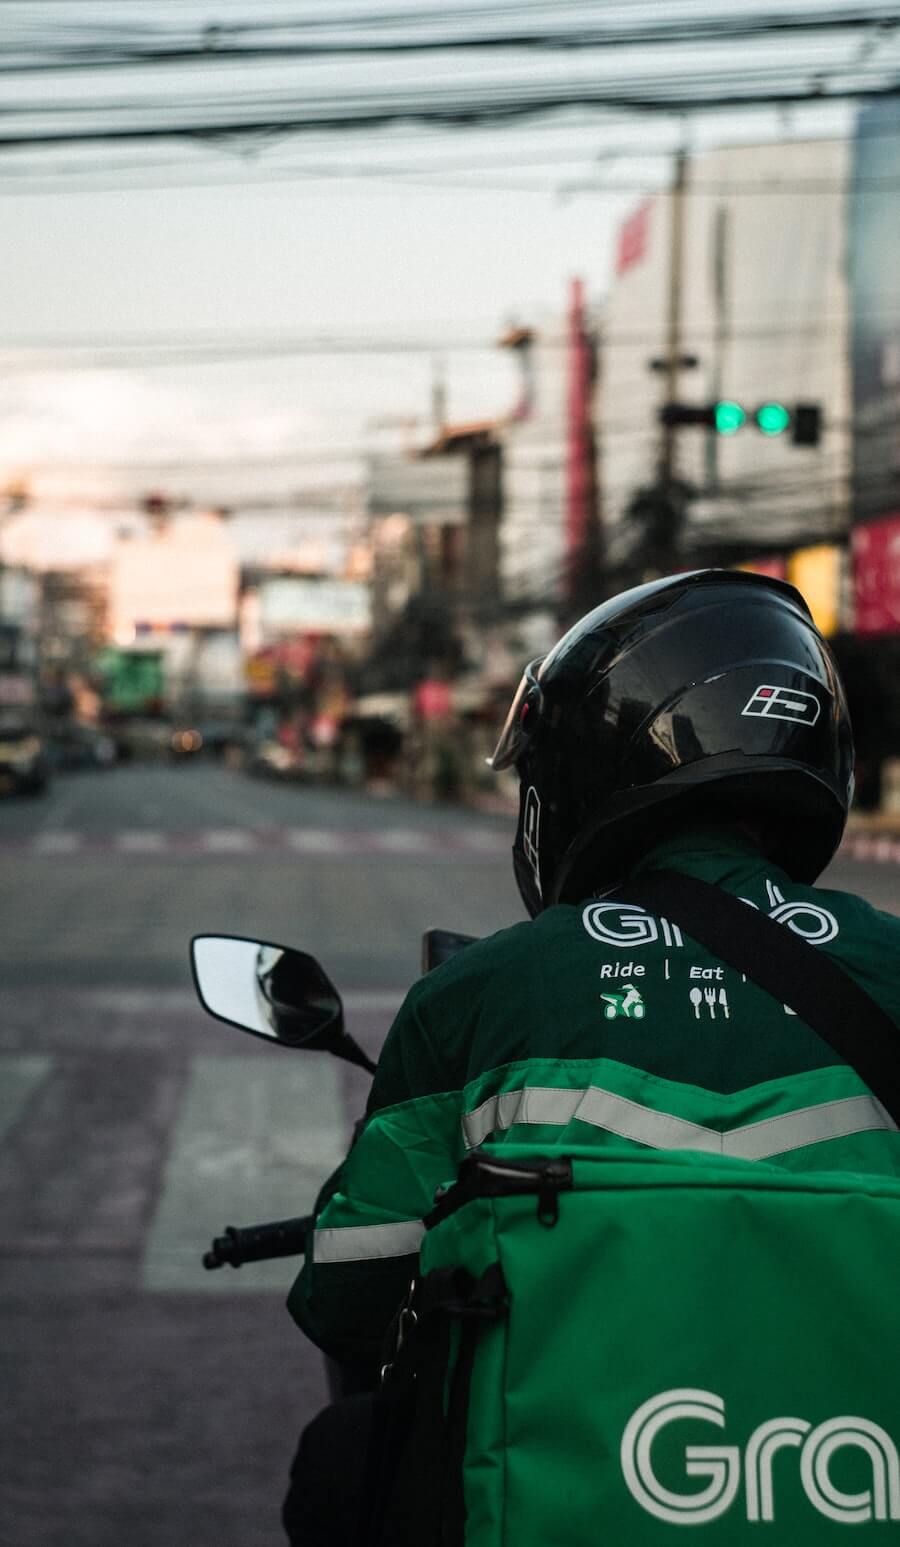 Grab Thailand Food Delivery